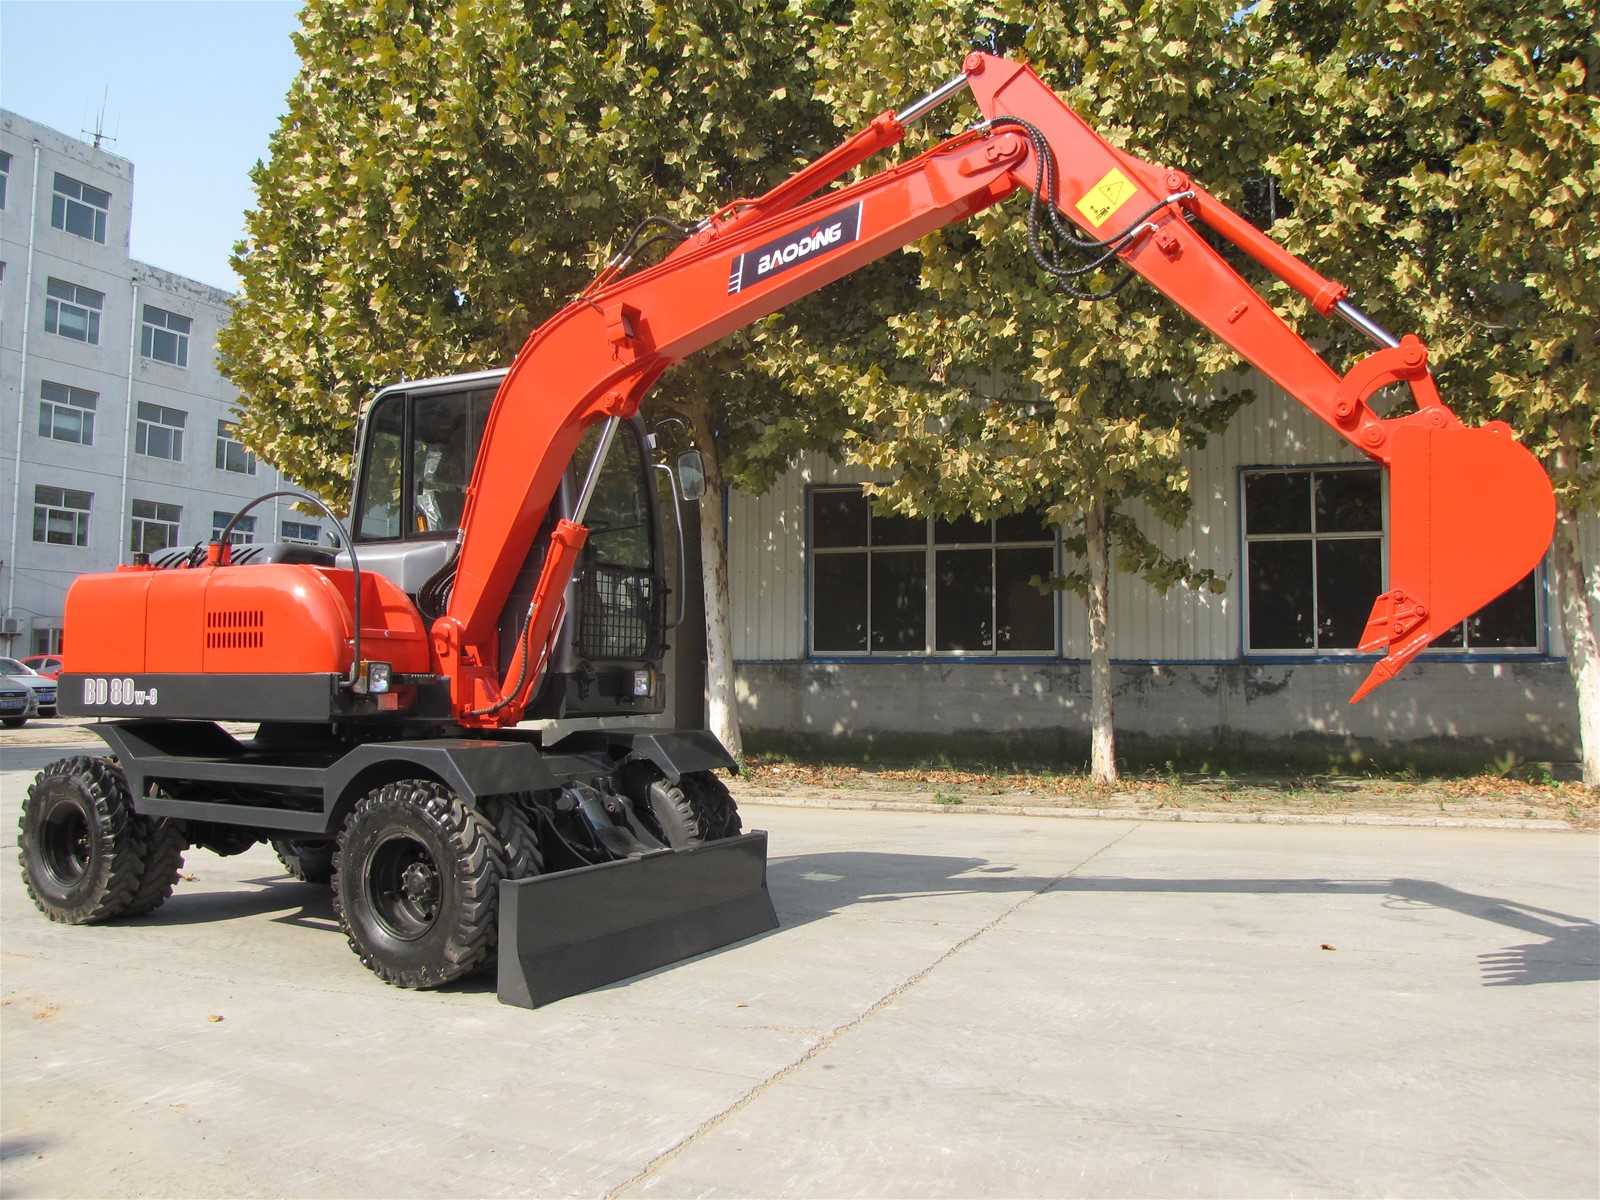 Cheap new small wheel excavator BD80 for sale